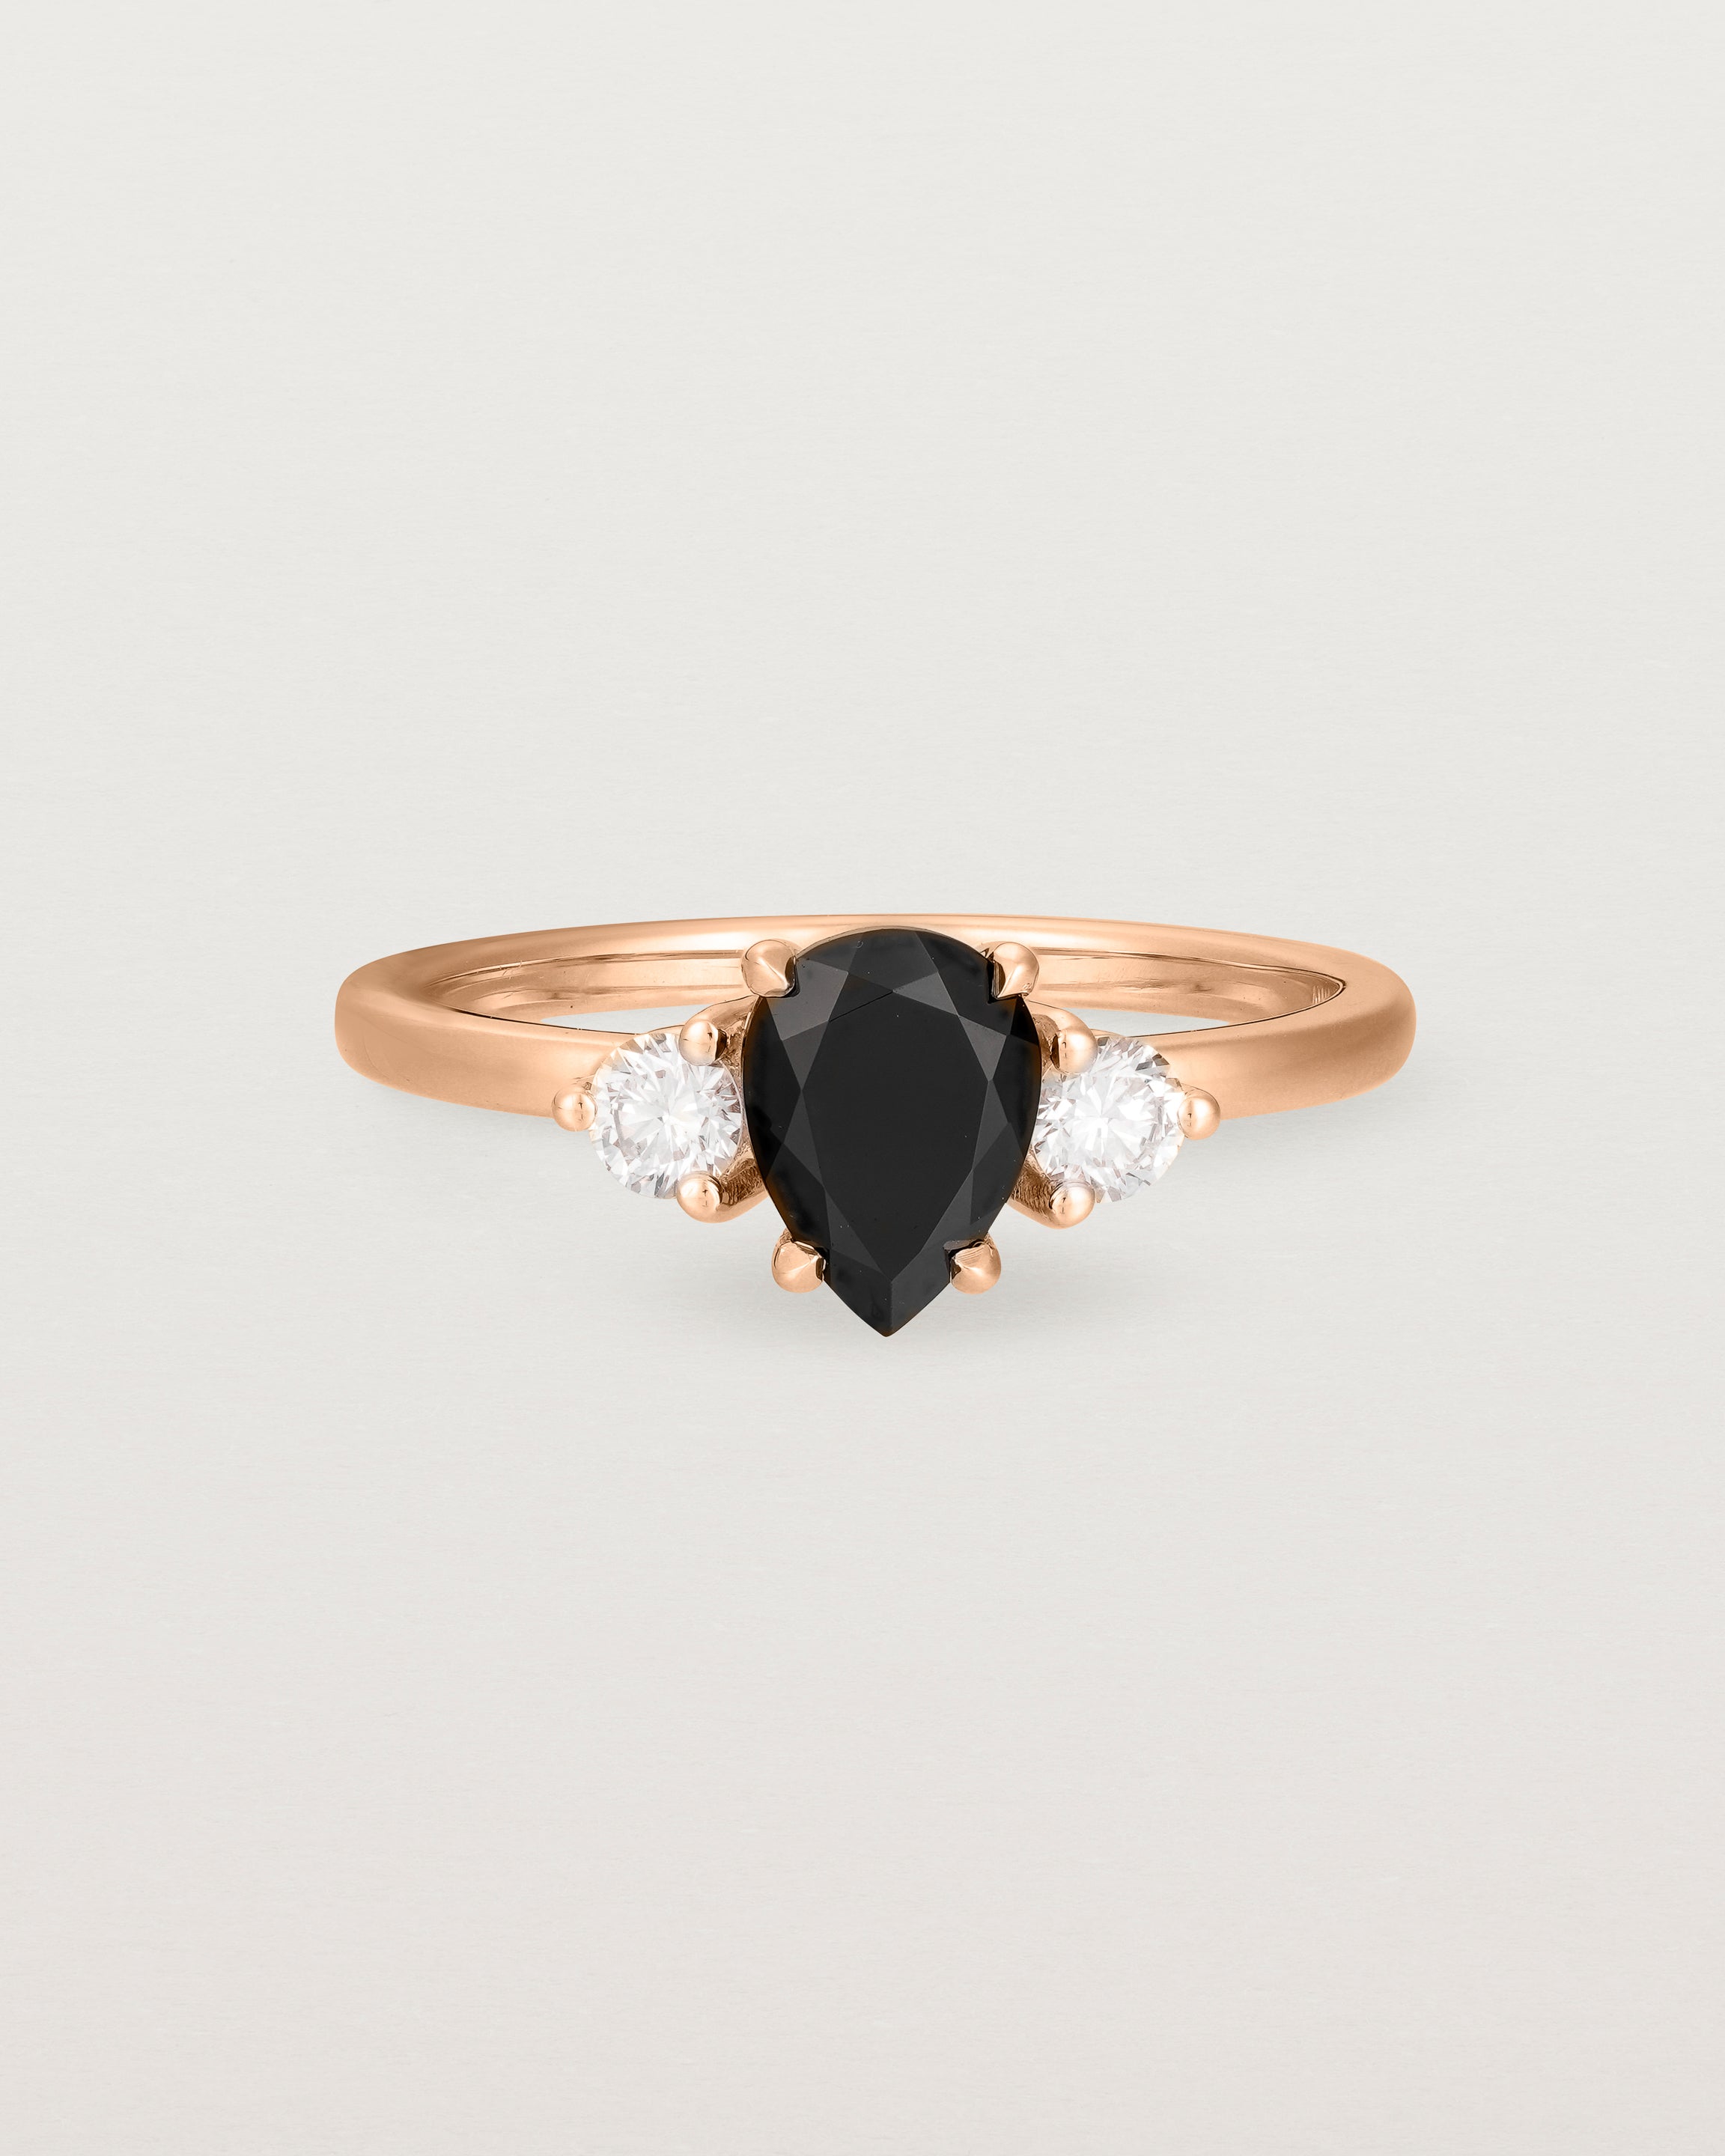 Front view of the Una Pear Trio Ring | Black Spinel & Diamonds | Rose Gold.